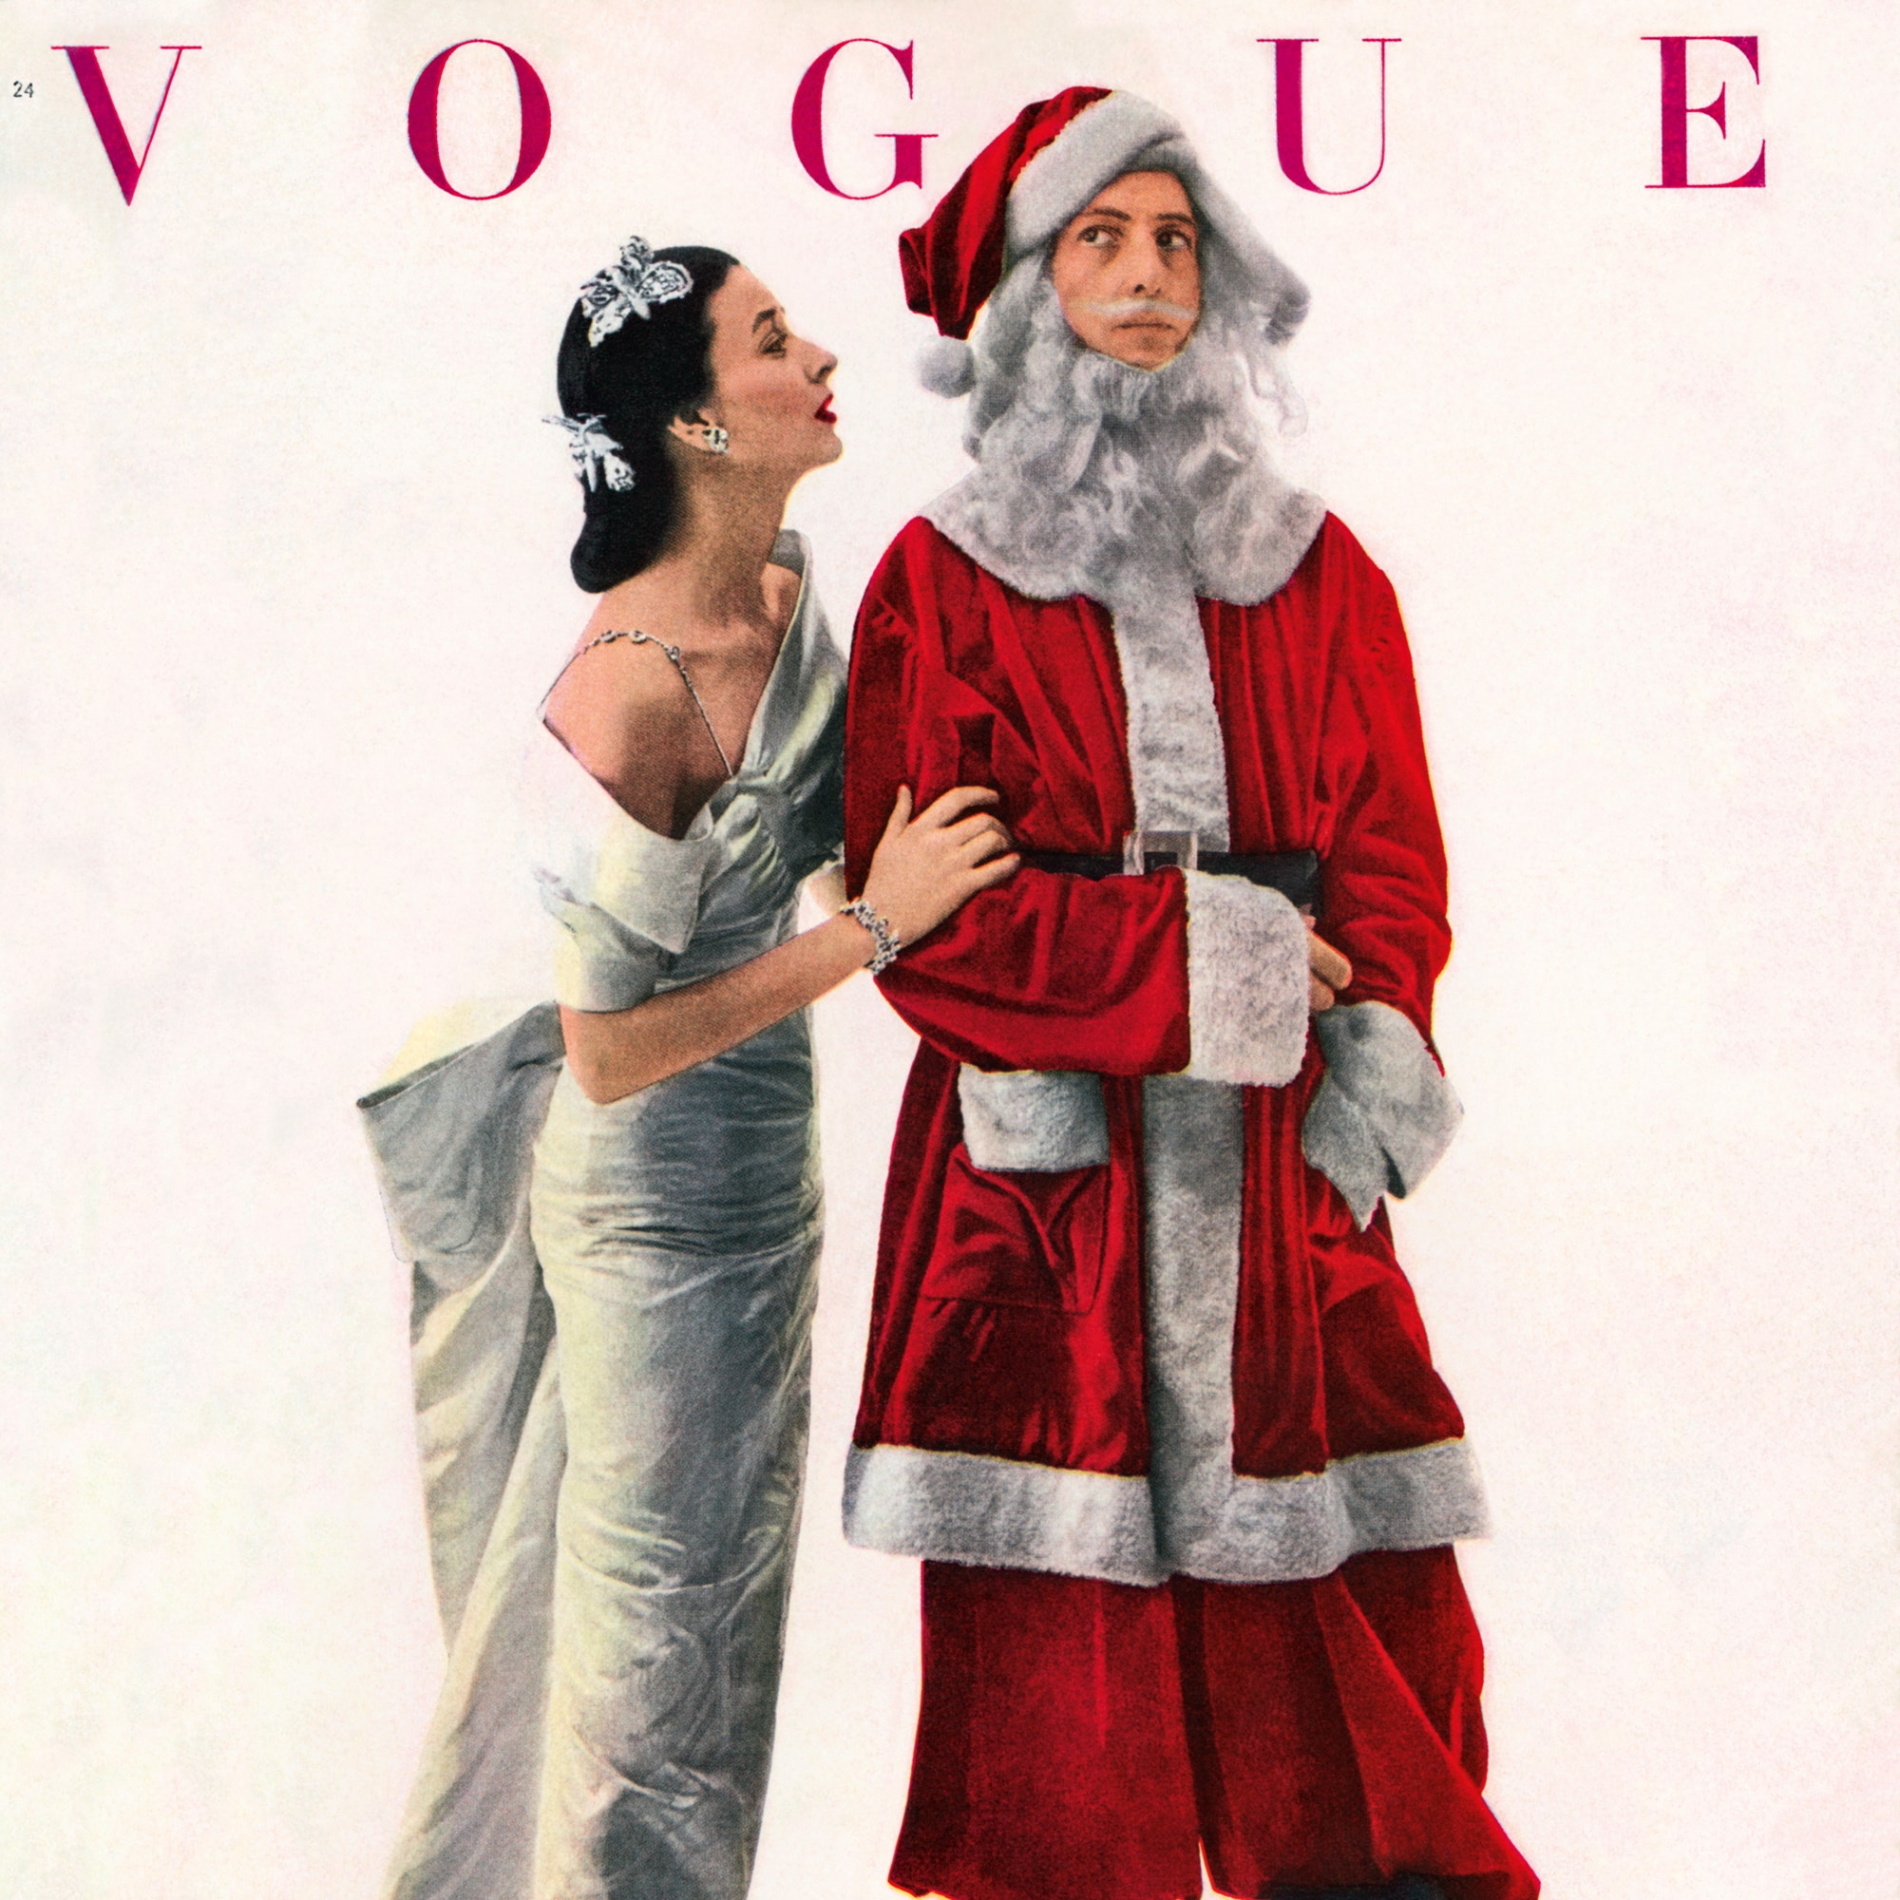 A Century Of Festive Vogue Shoots To Inspire Your Holiday Style